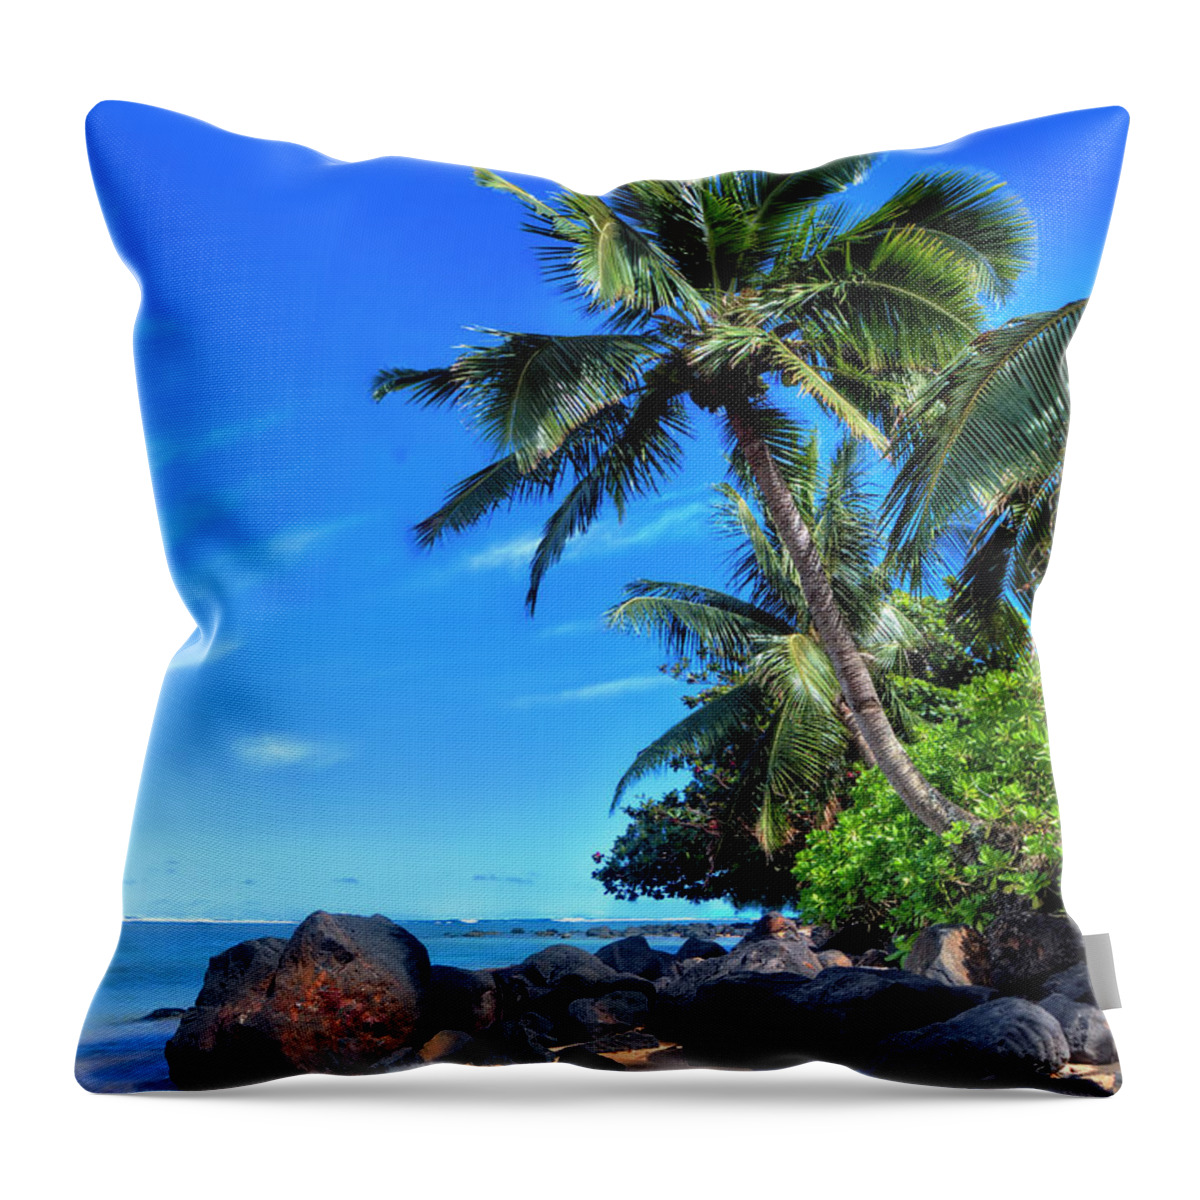 Granger Photography Throw Pillow featuring the photograph Anini Beach by Brad Granger